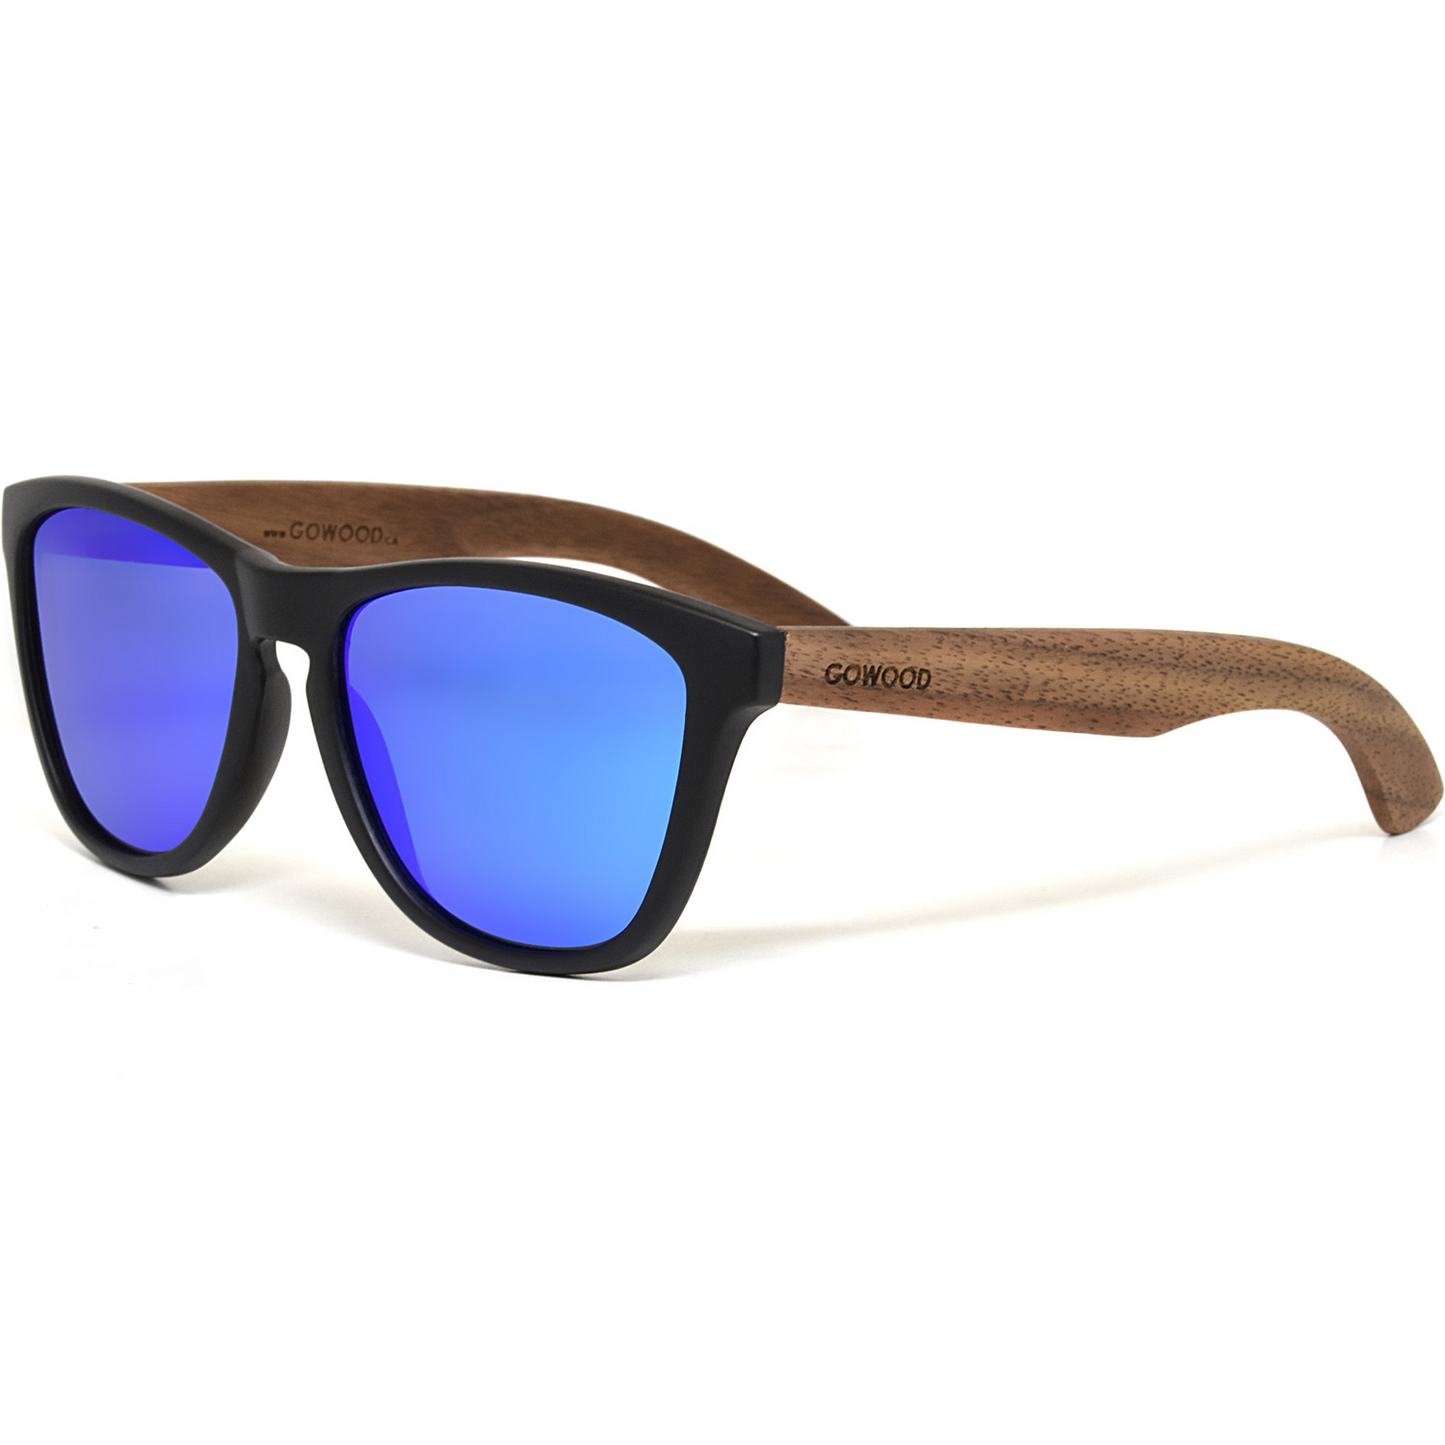 Classic walnut wood sunglasses with blue mirrored polarized lenses